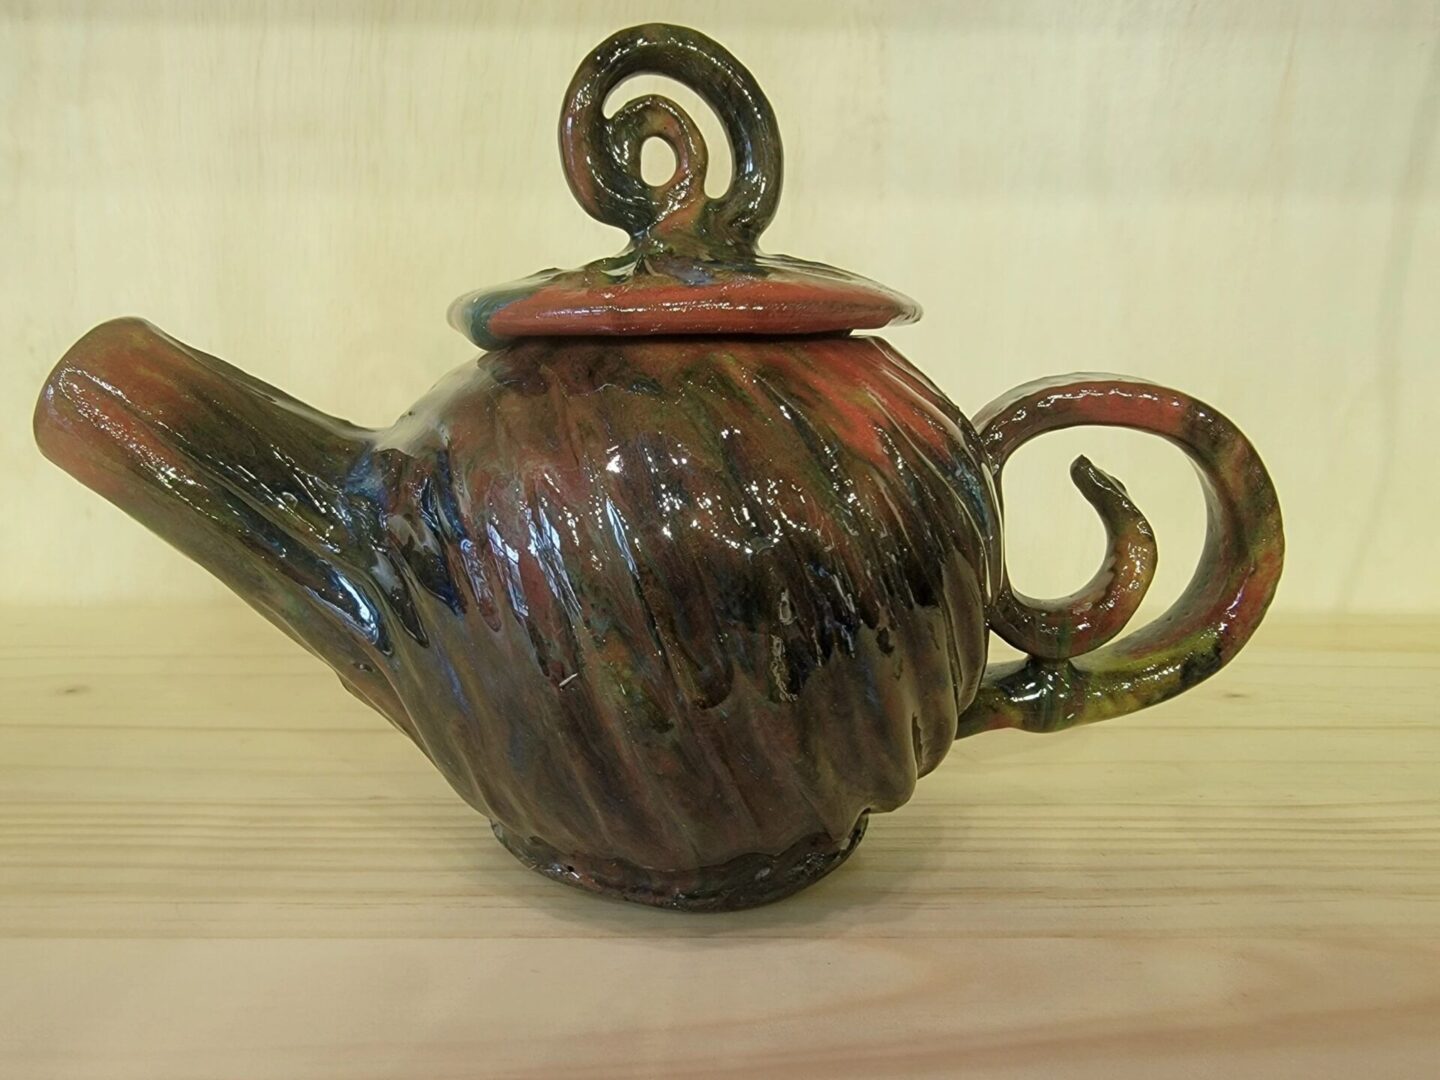 A brown teapot with red swirl design on top of wooden table.